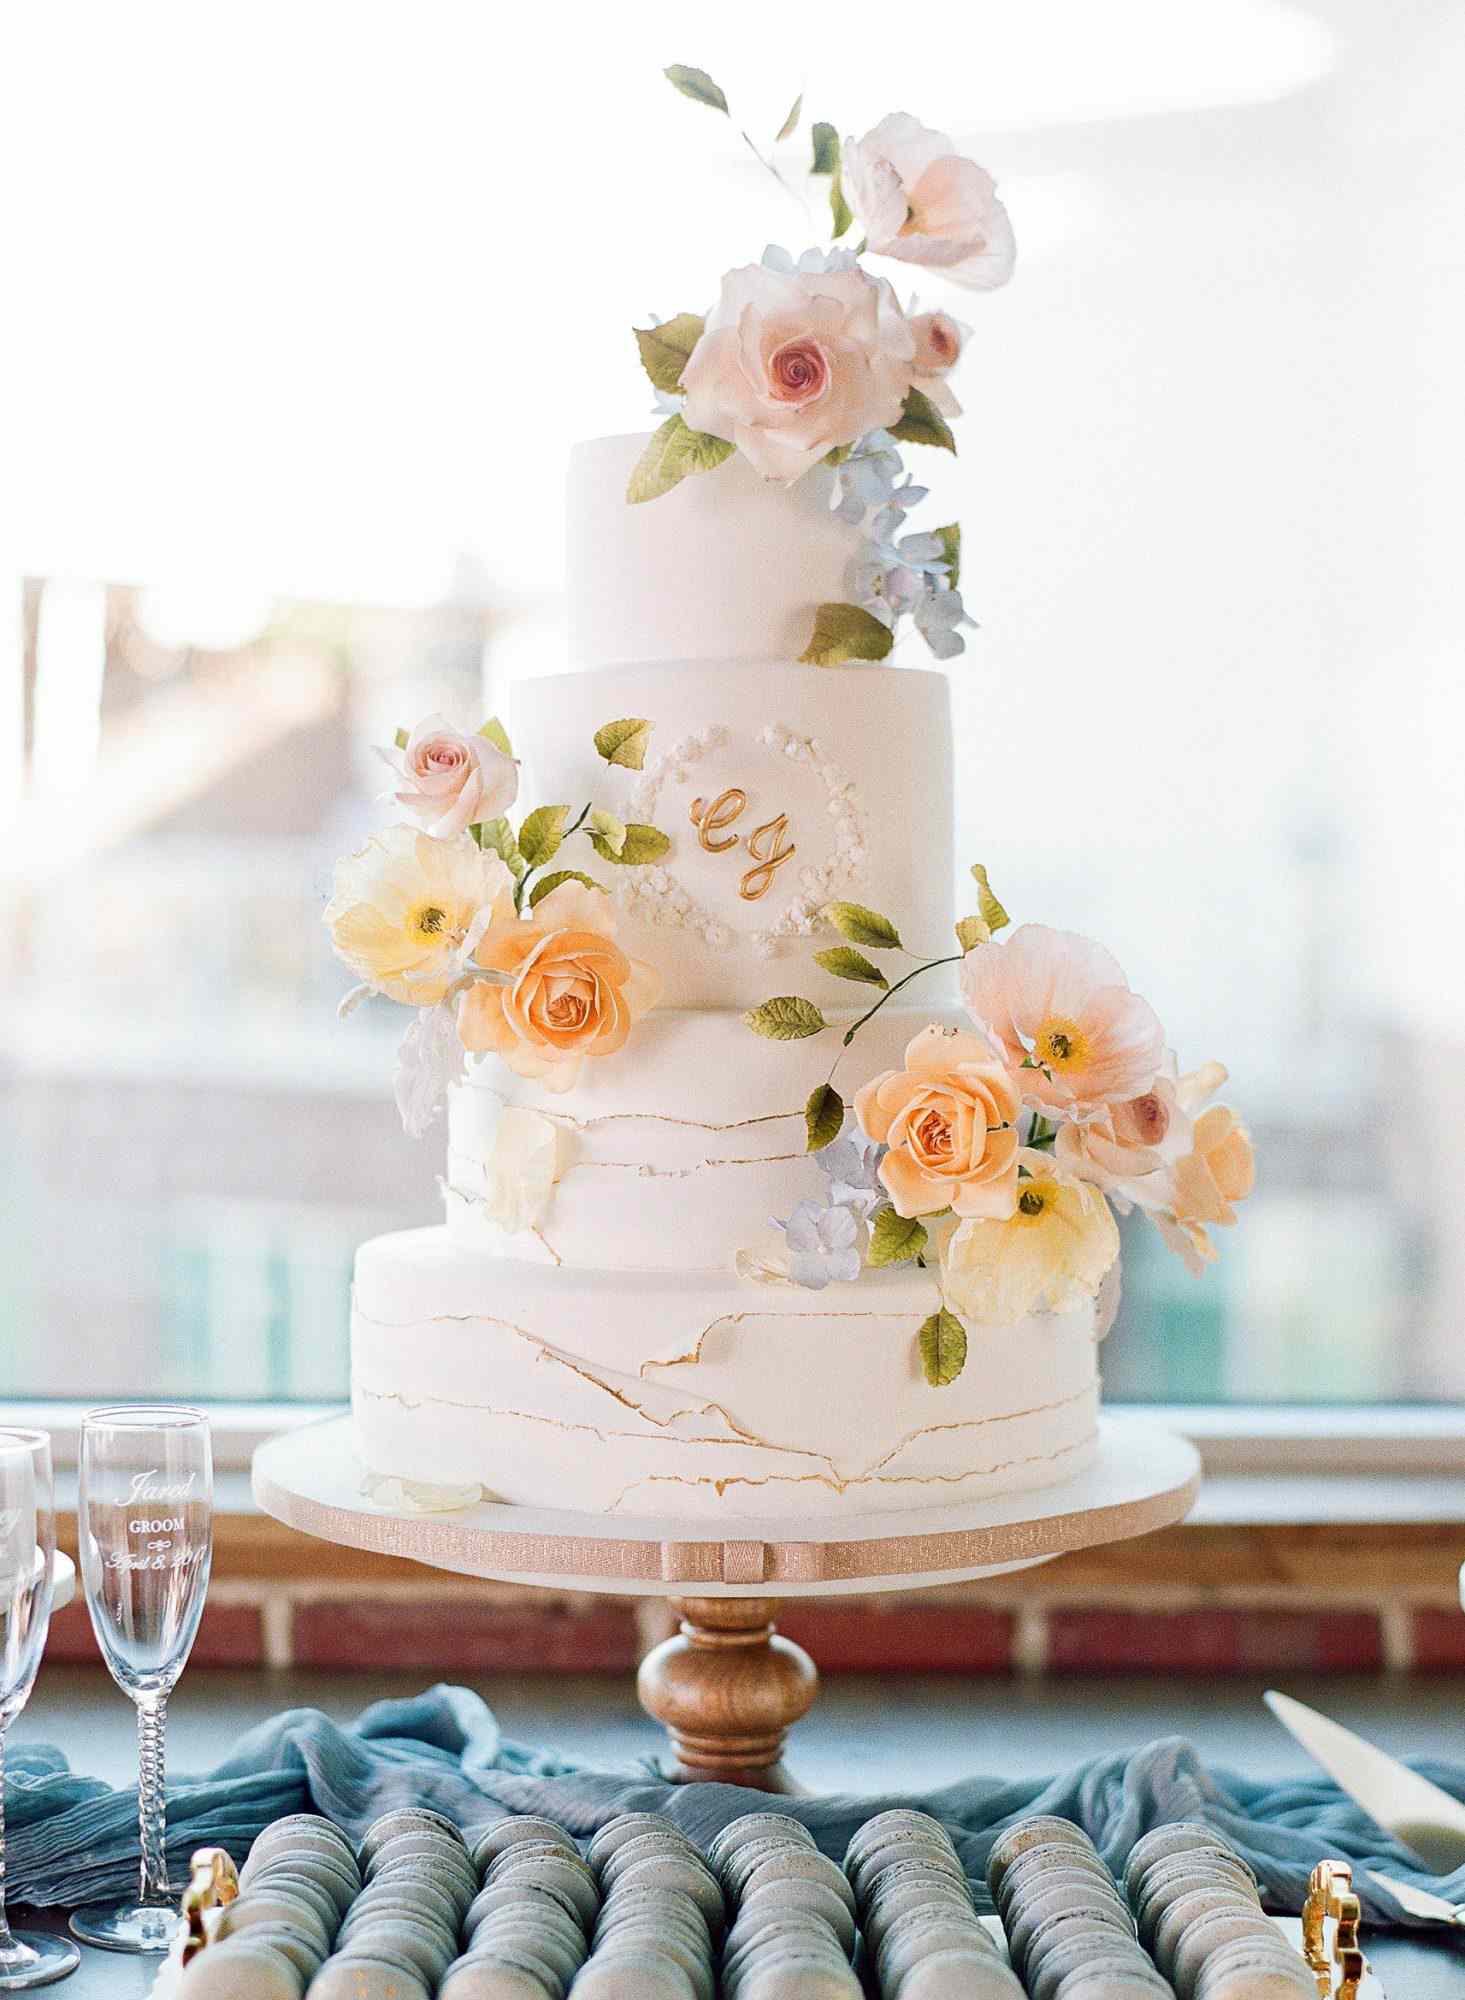 <p>Jonathan Caleb Cake used realistic sugar flowers—insect nibbles and all—to decorate this cake, which was served at a flower-filled, garden wedding.</p>
